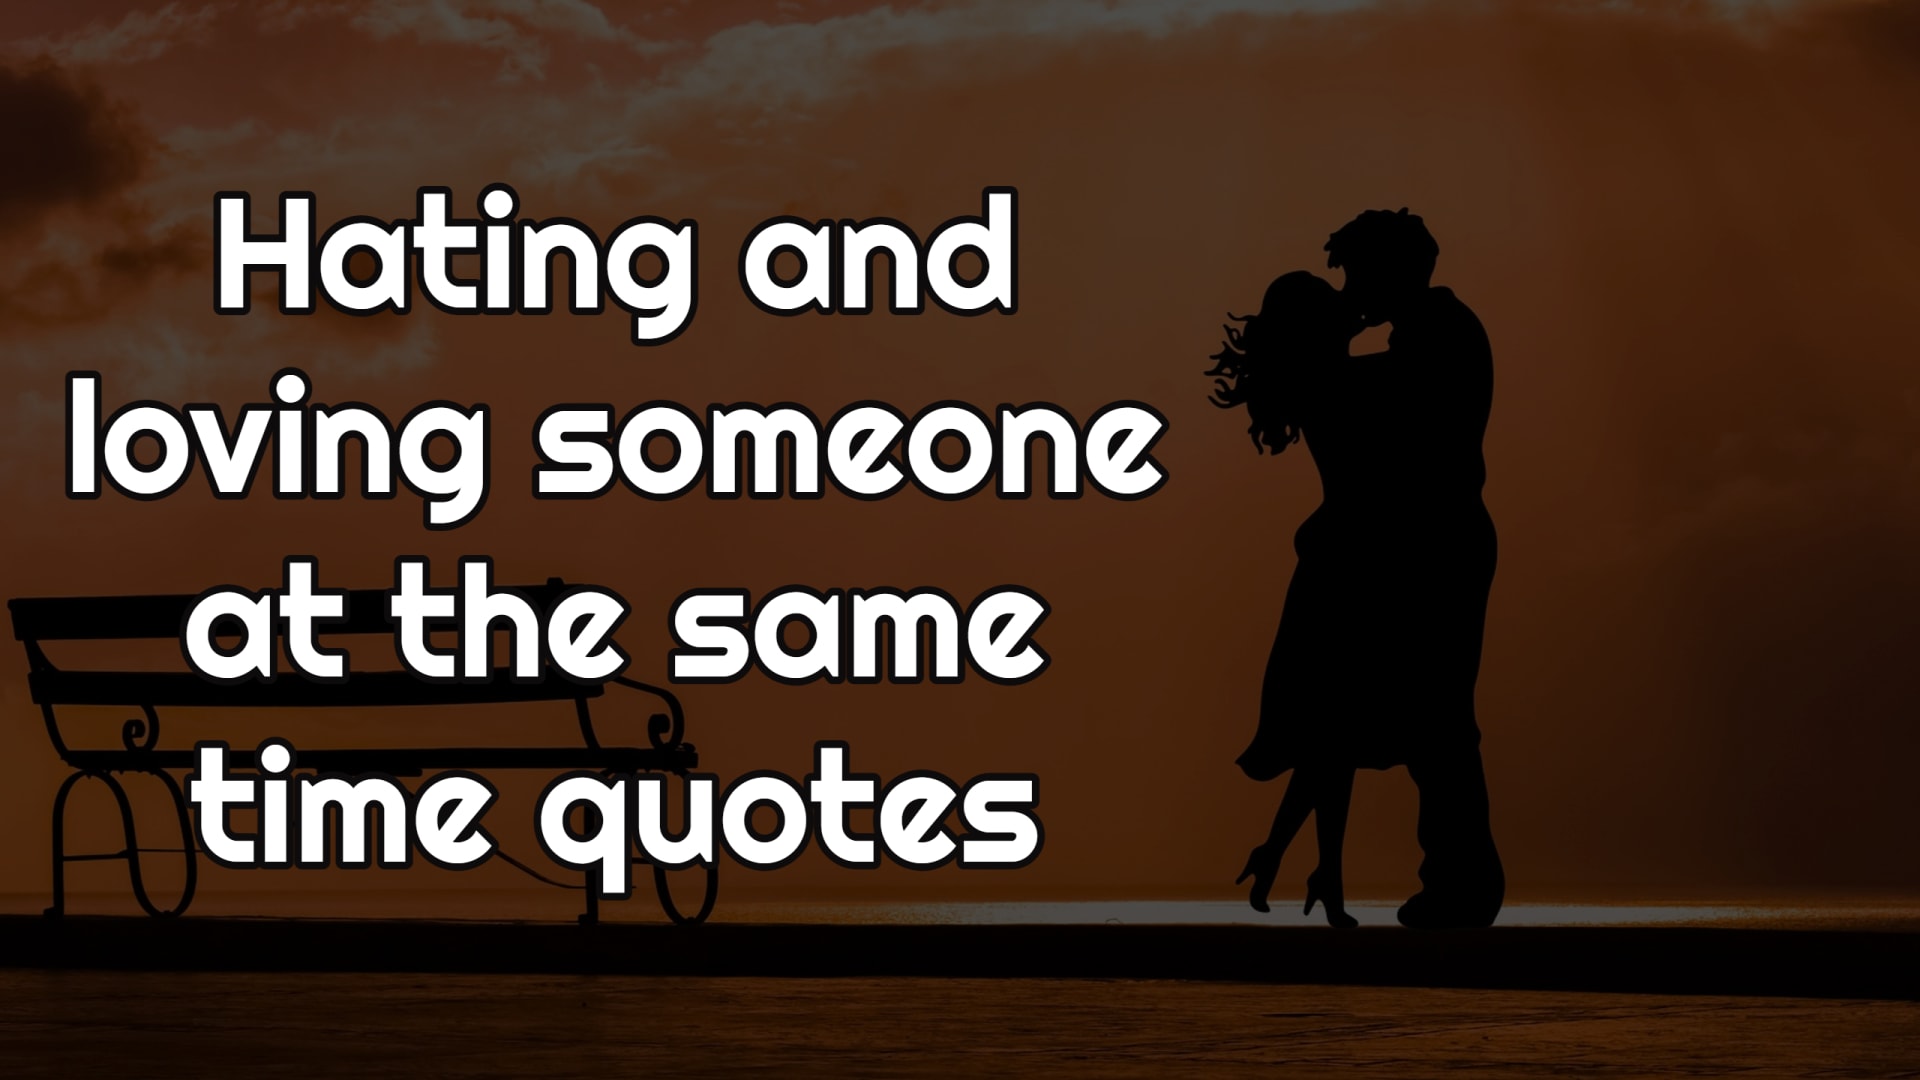 Quotes about still loving someone